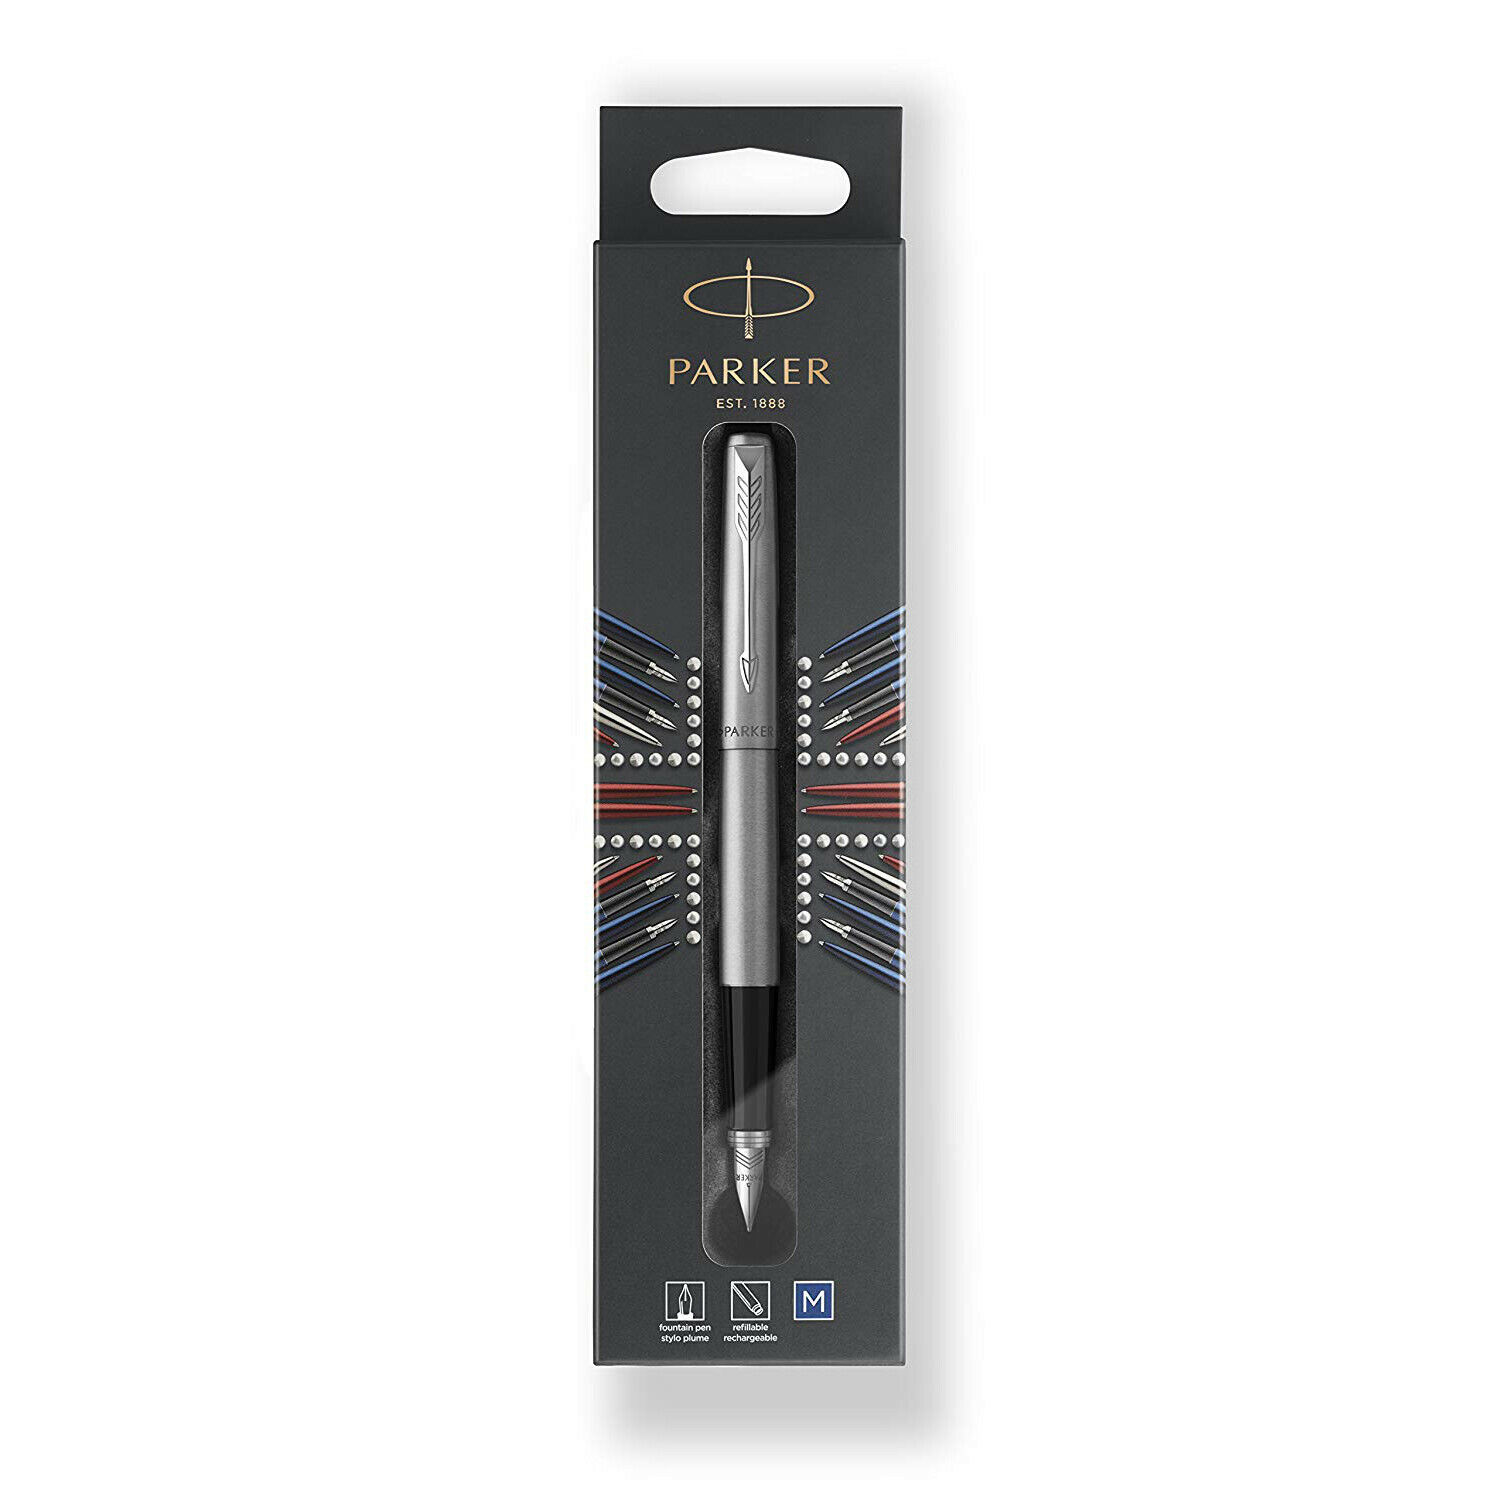 Parker Jotter Fountain Pen, Stainless Steel Body with Chrome Trim, Medium Point